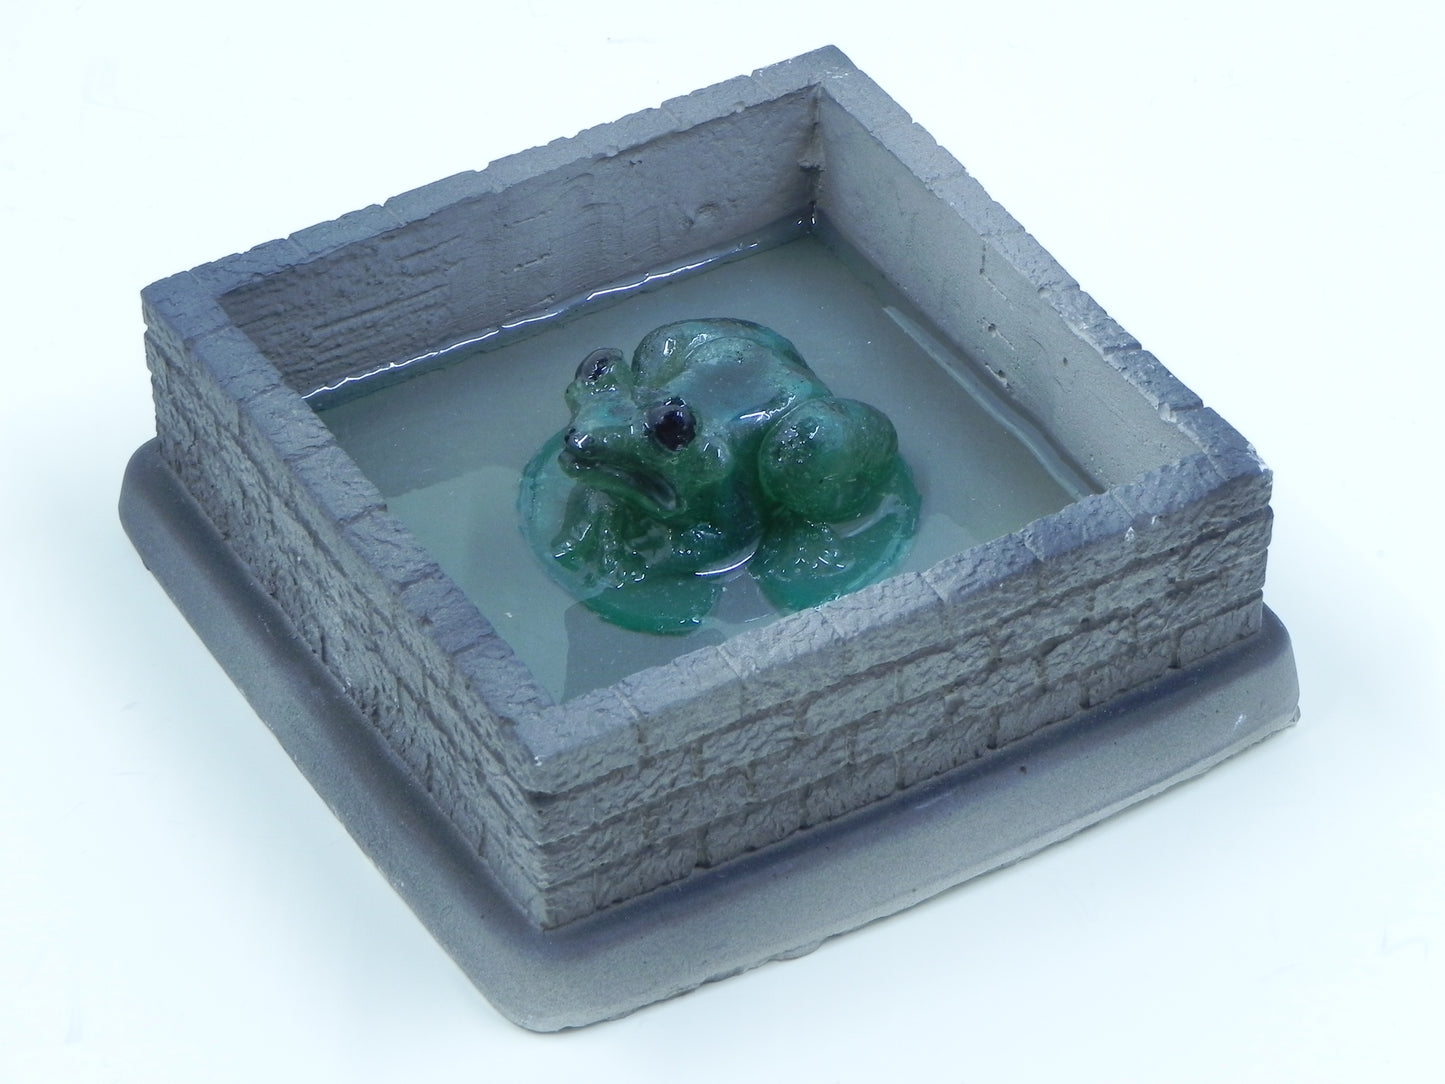 "Frog in stone walled pond"